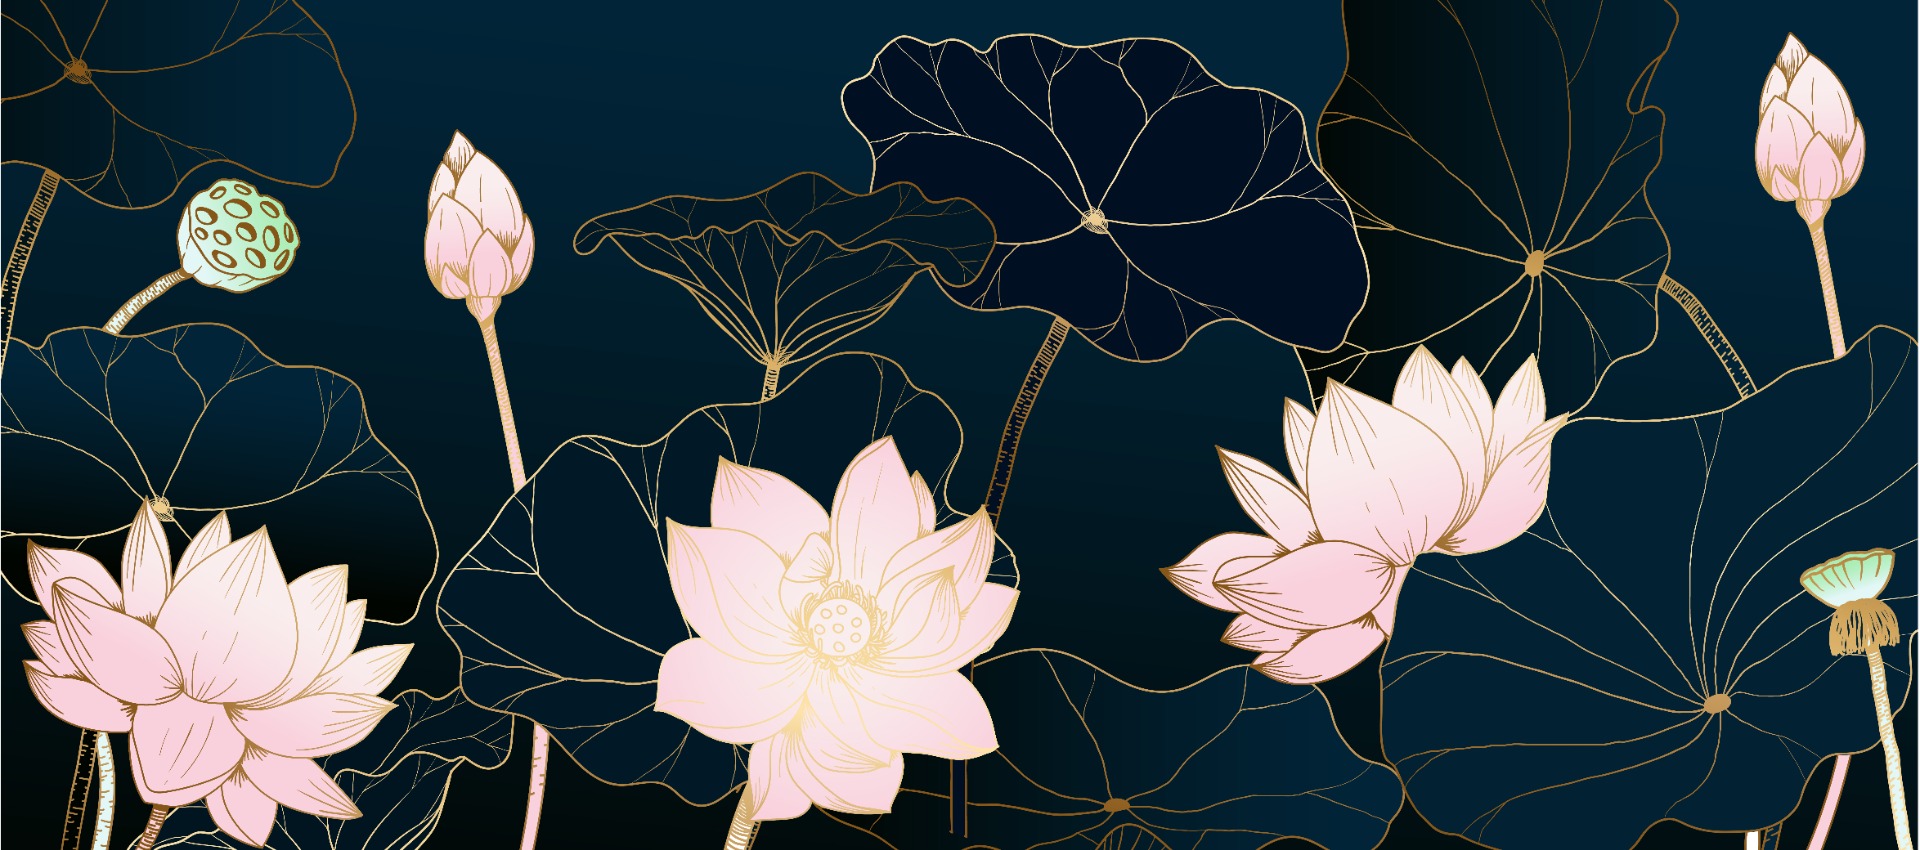 Lotus Garden Background Images HD Pictures and Wallpaper For Free Download   Pngtree